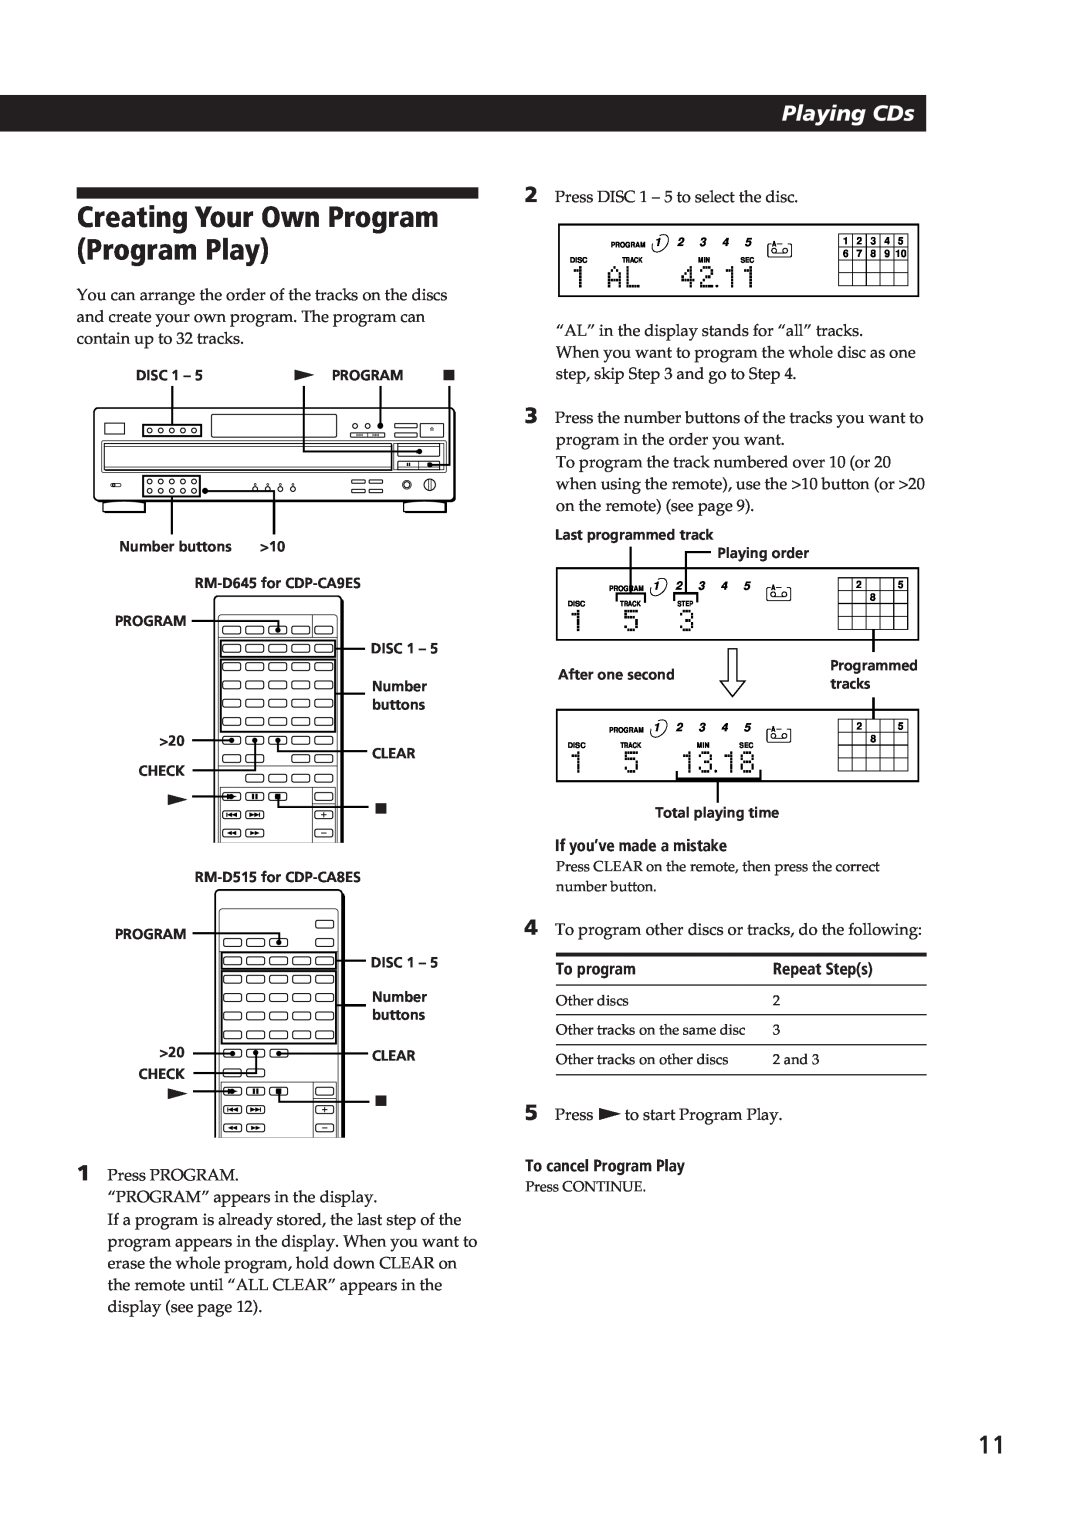 Sony CDP-CA9ES Creating Your Own Program Program Play, If you’ve made a mistake, To program, Repeat Steps, Playing CDs 